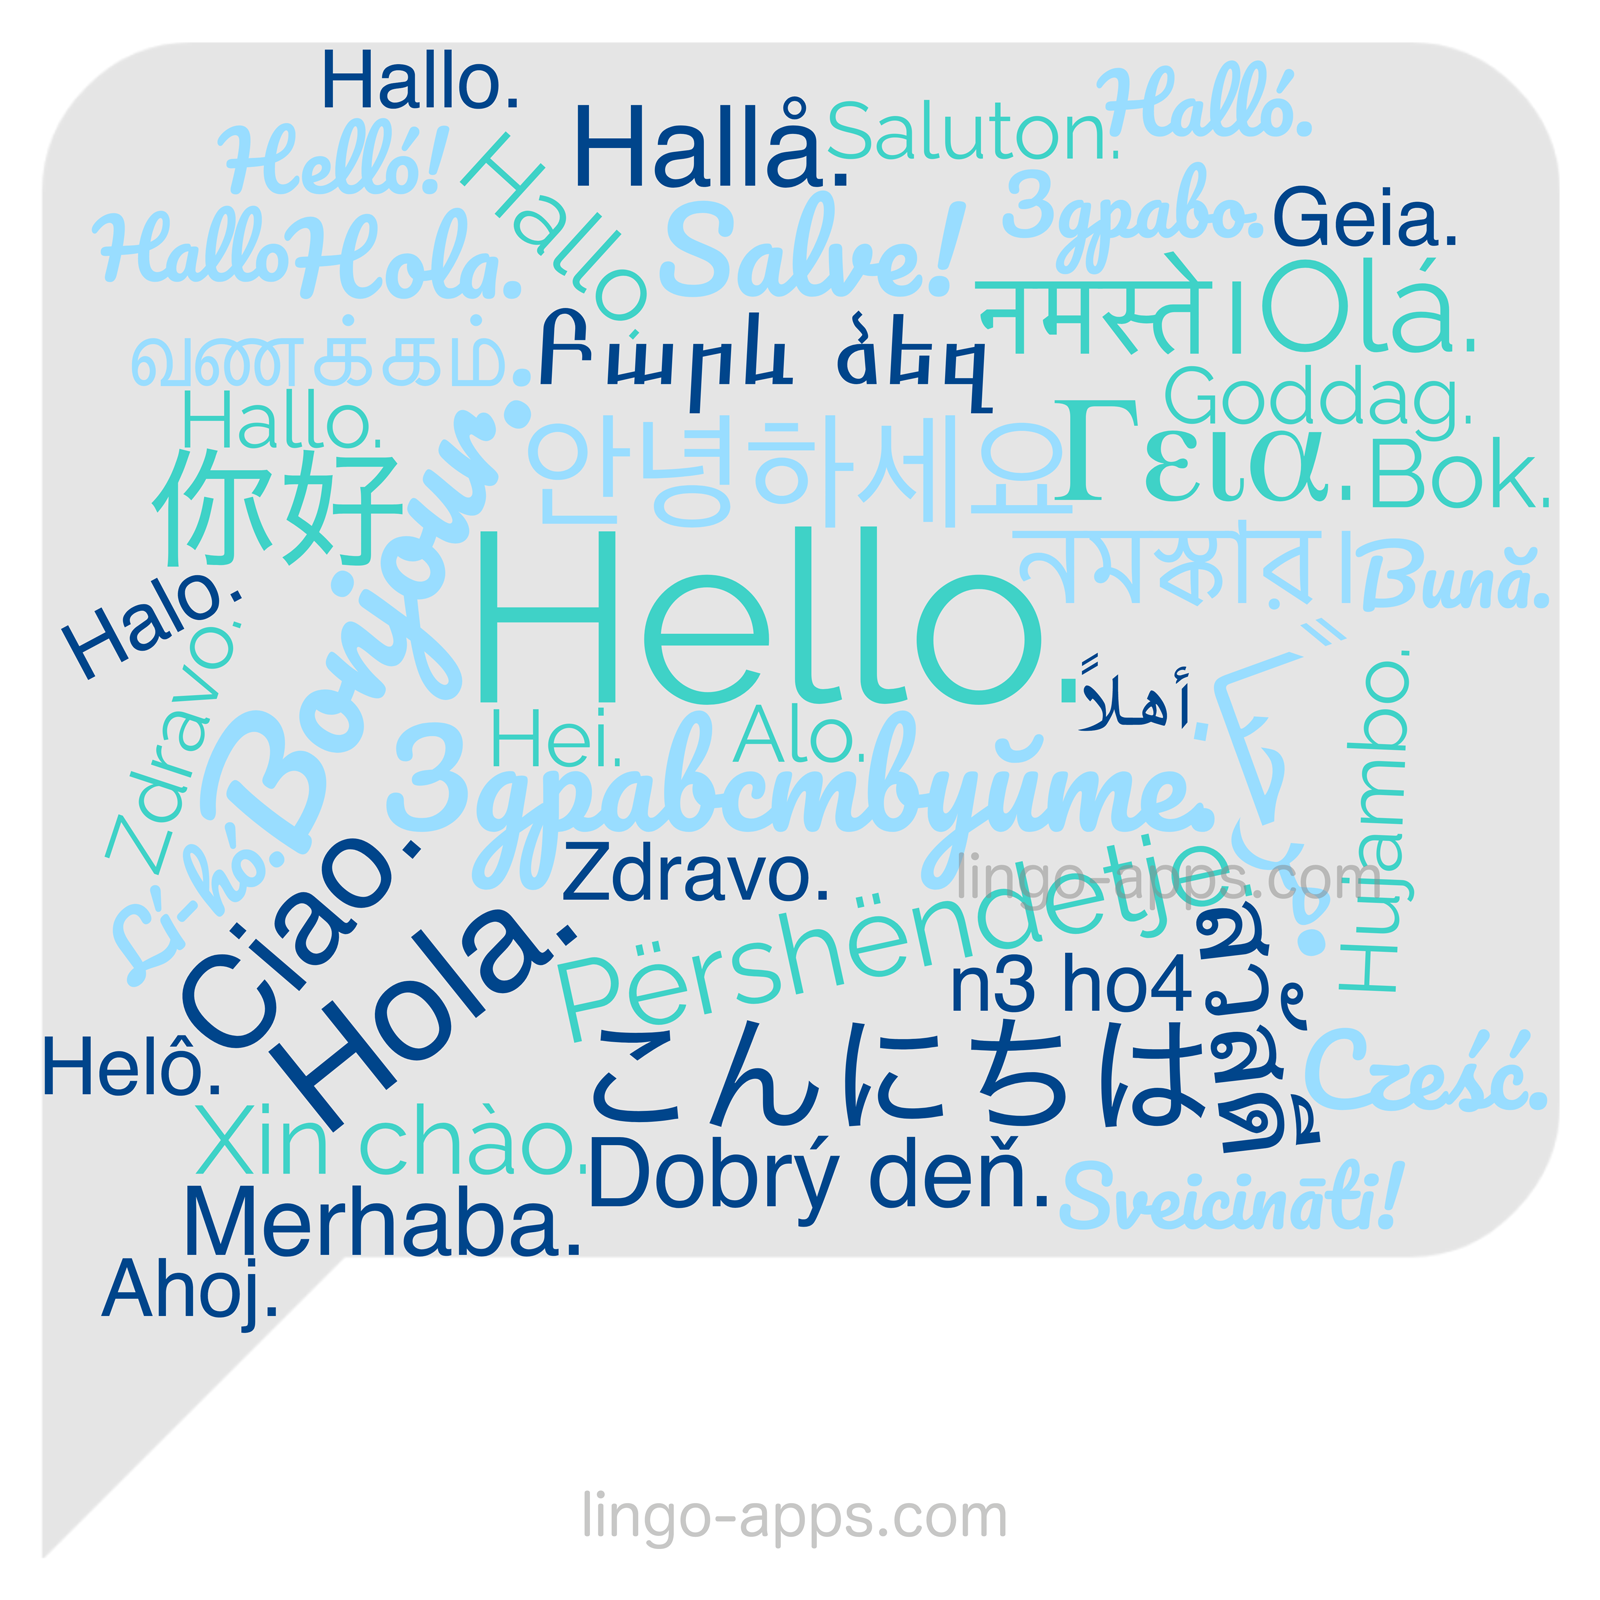 Hello in Different Languages: 113 Distinct Ways to Say Hi